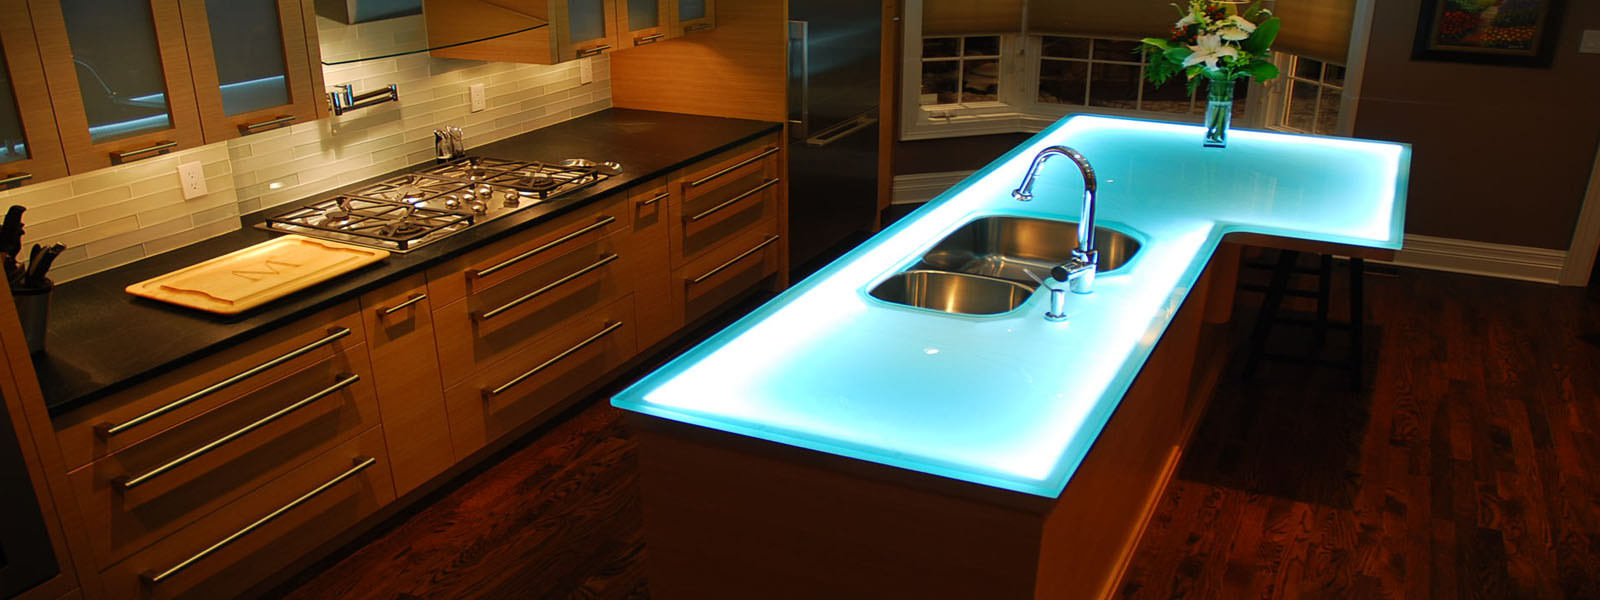 Decor Tips Awesome Recycled Glass Countertops With Kitchen Sink regarding Recycled Glass Kitchen Countertops